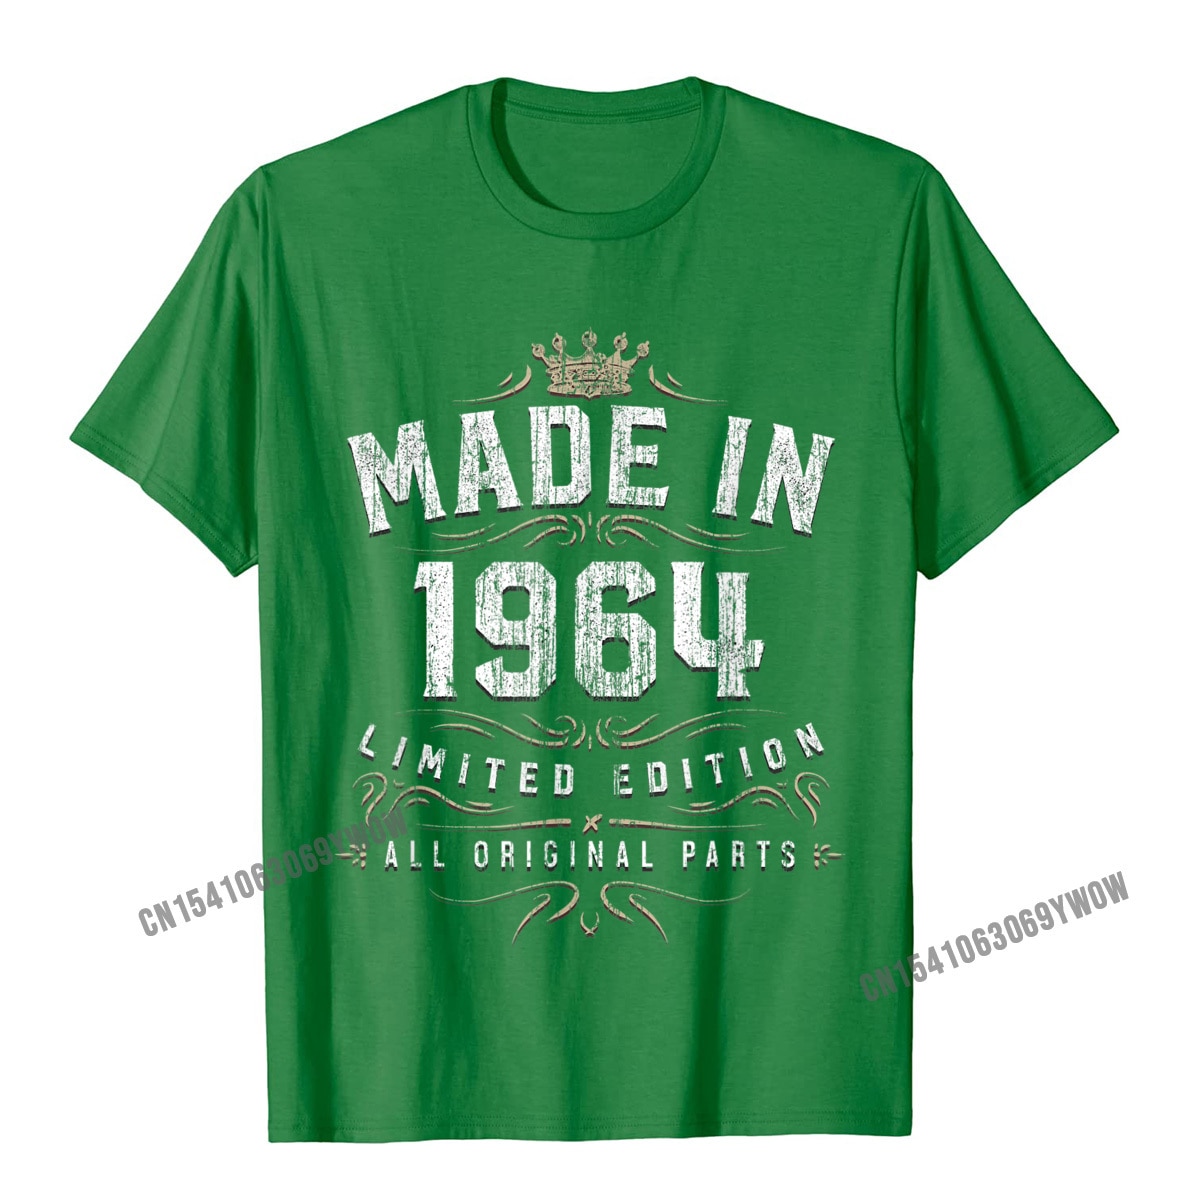 Camisa Family T Shirt for Men Cotton Fabric Father Day Tops Shirt Simple Style Tops & Tees Short Sleeve Prevalent Round Collar Made In 1964 Shirt Birthday 55 Limited Edition Image Gifts__994 green